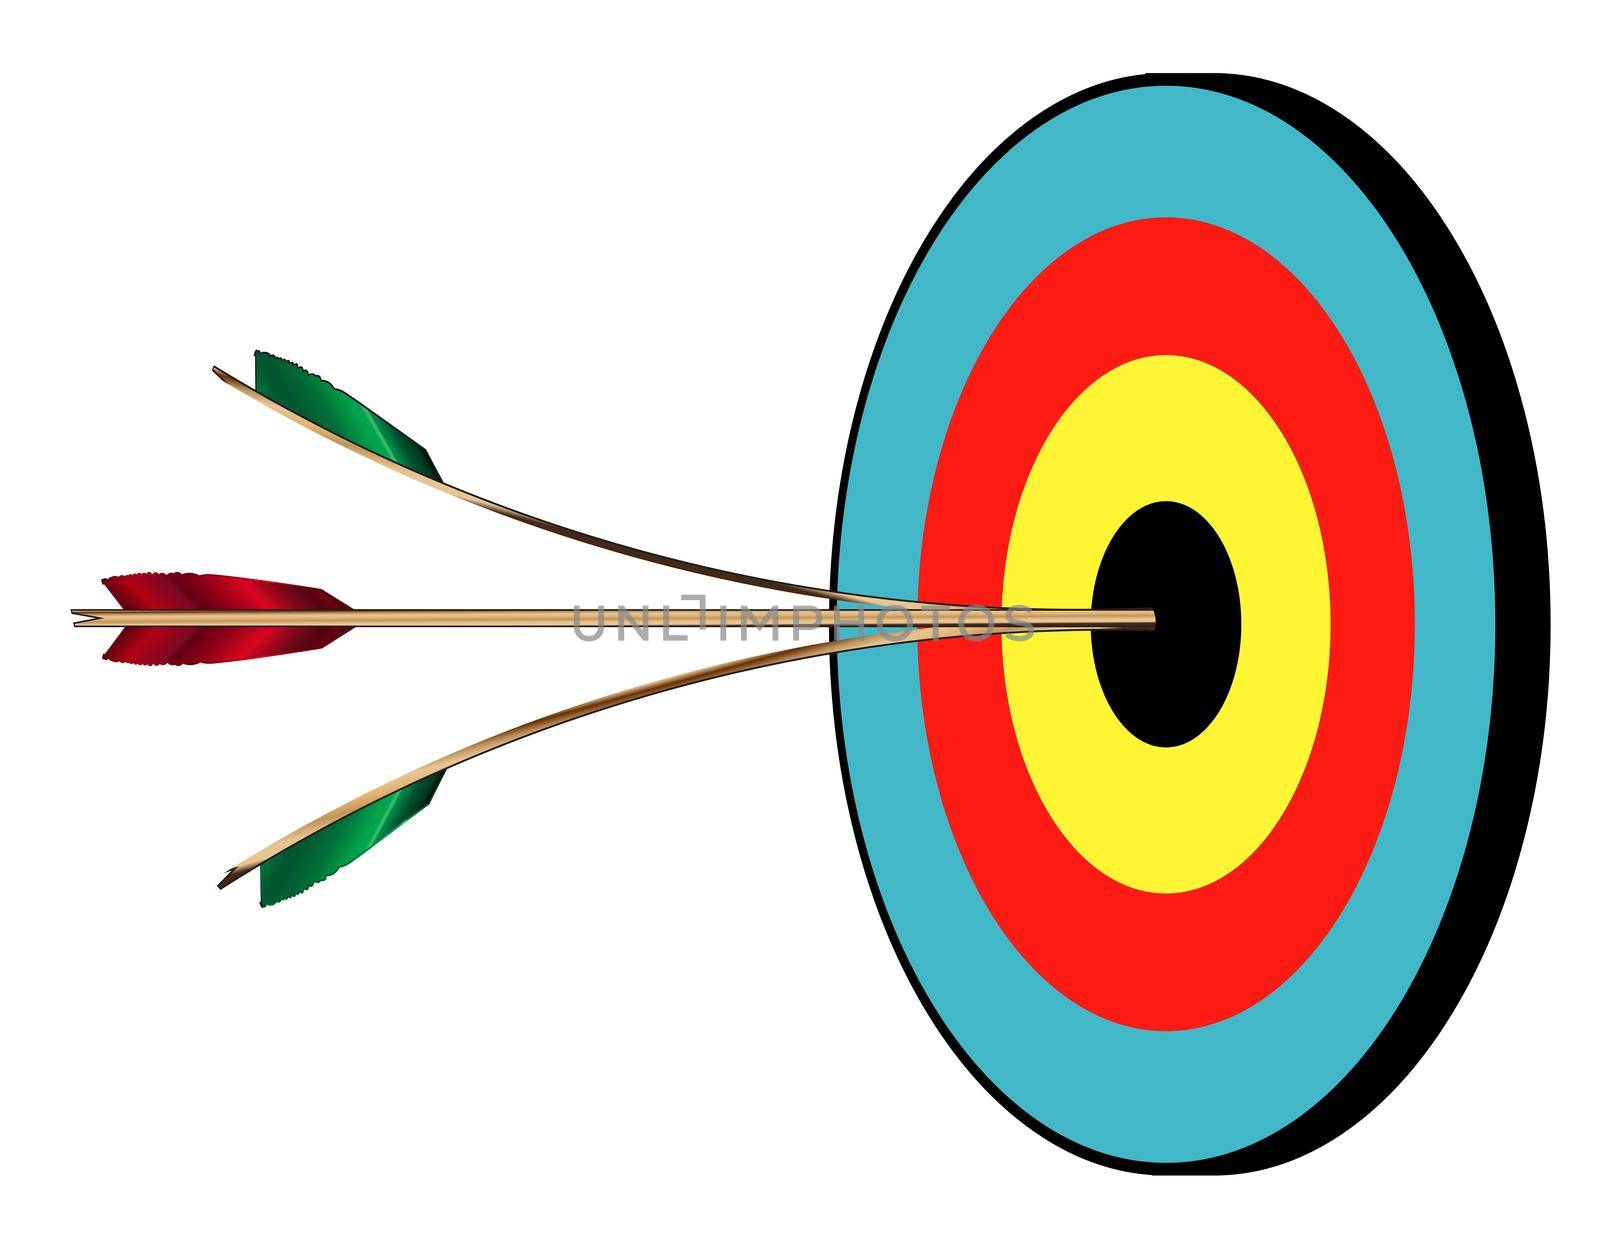 The target for a bow and arrow with two perfect bulls and a splitting arrow